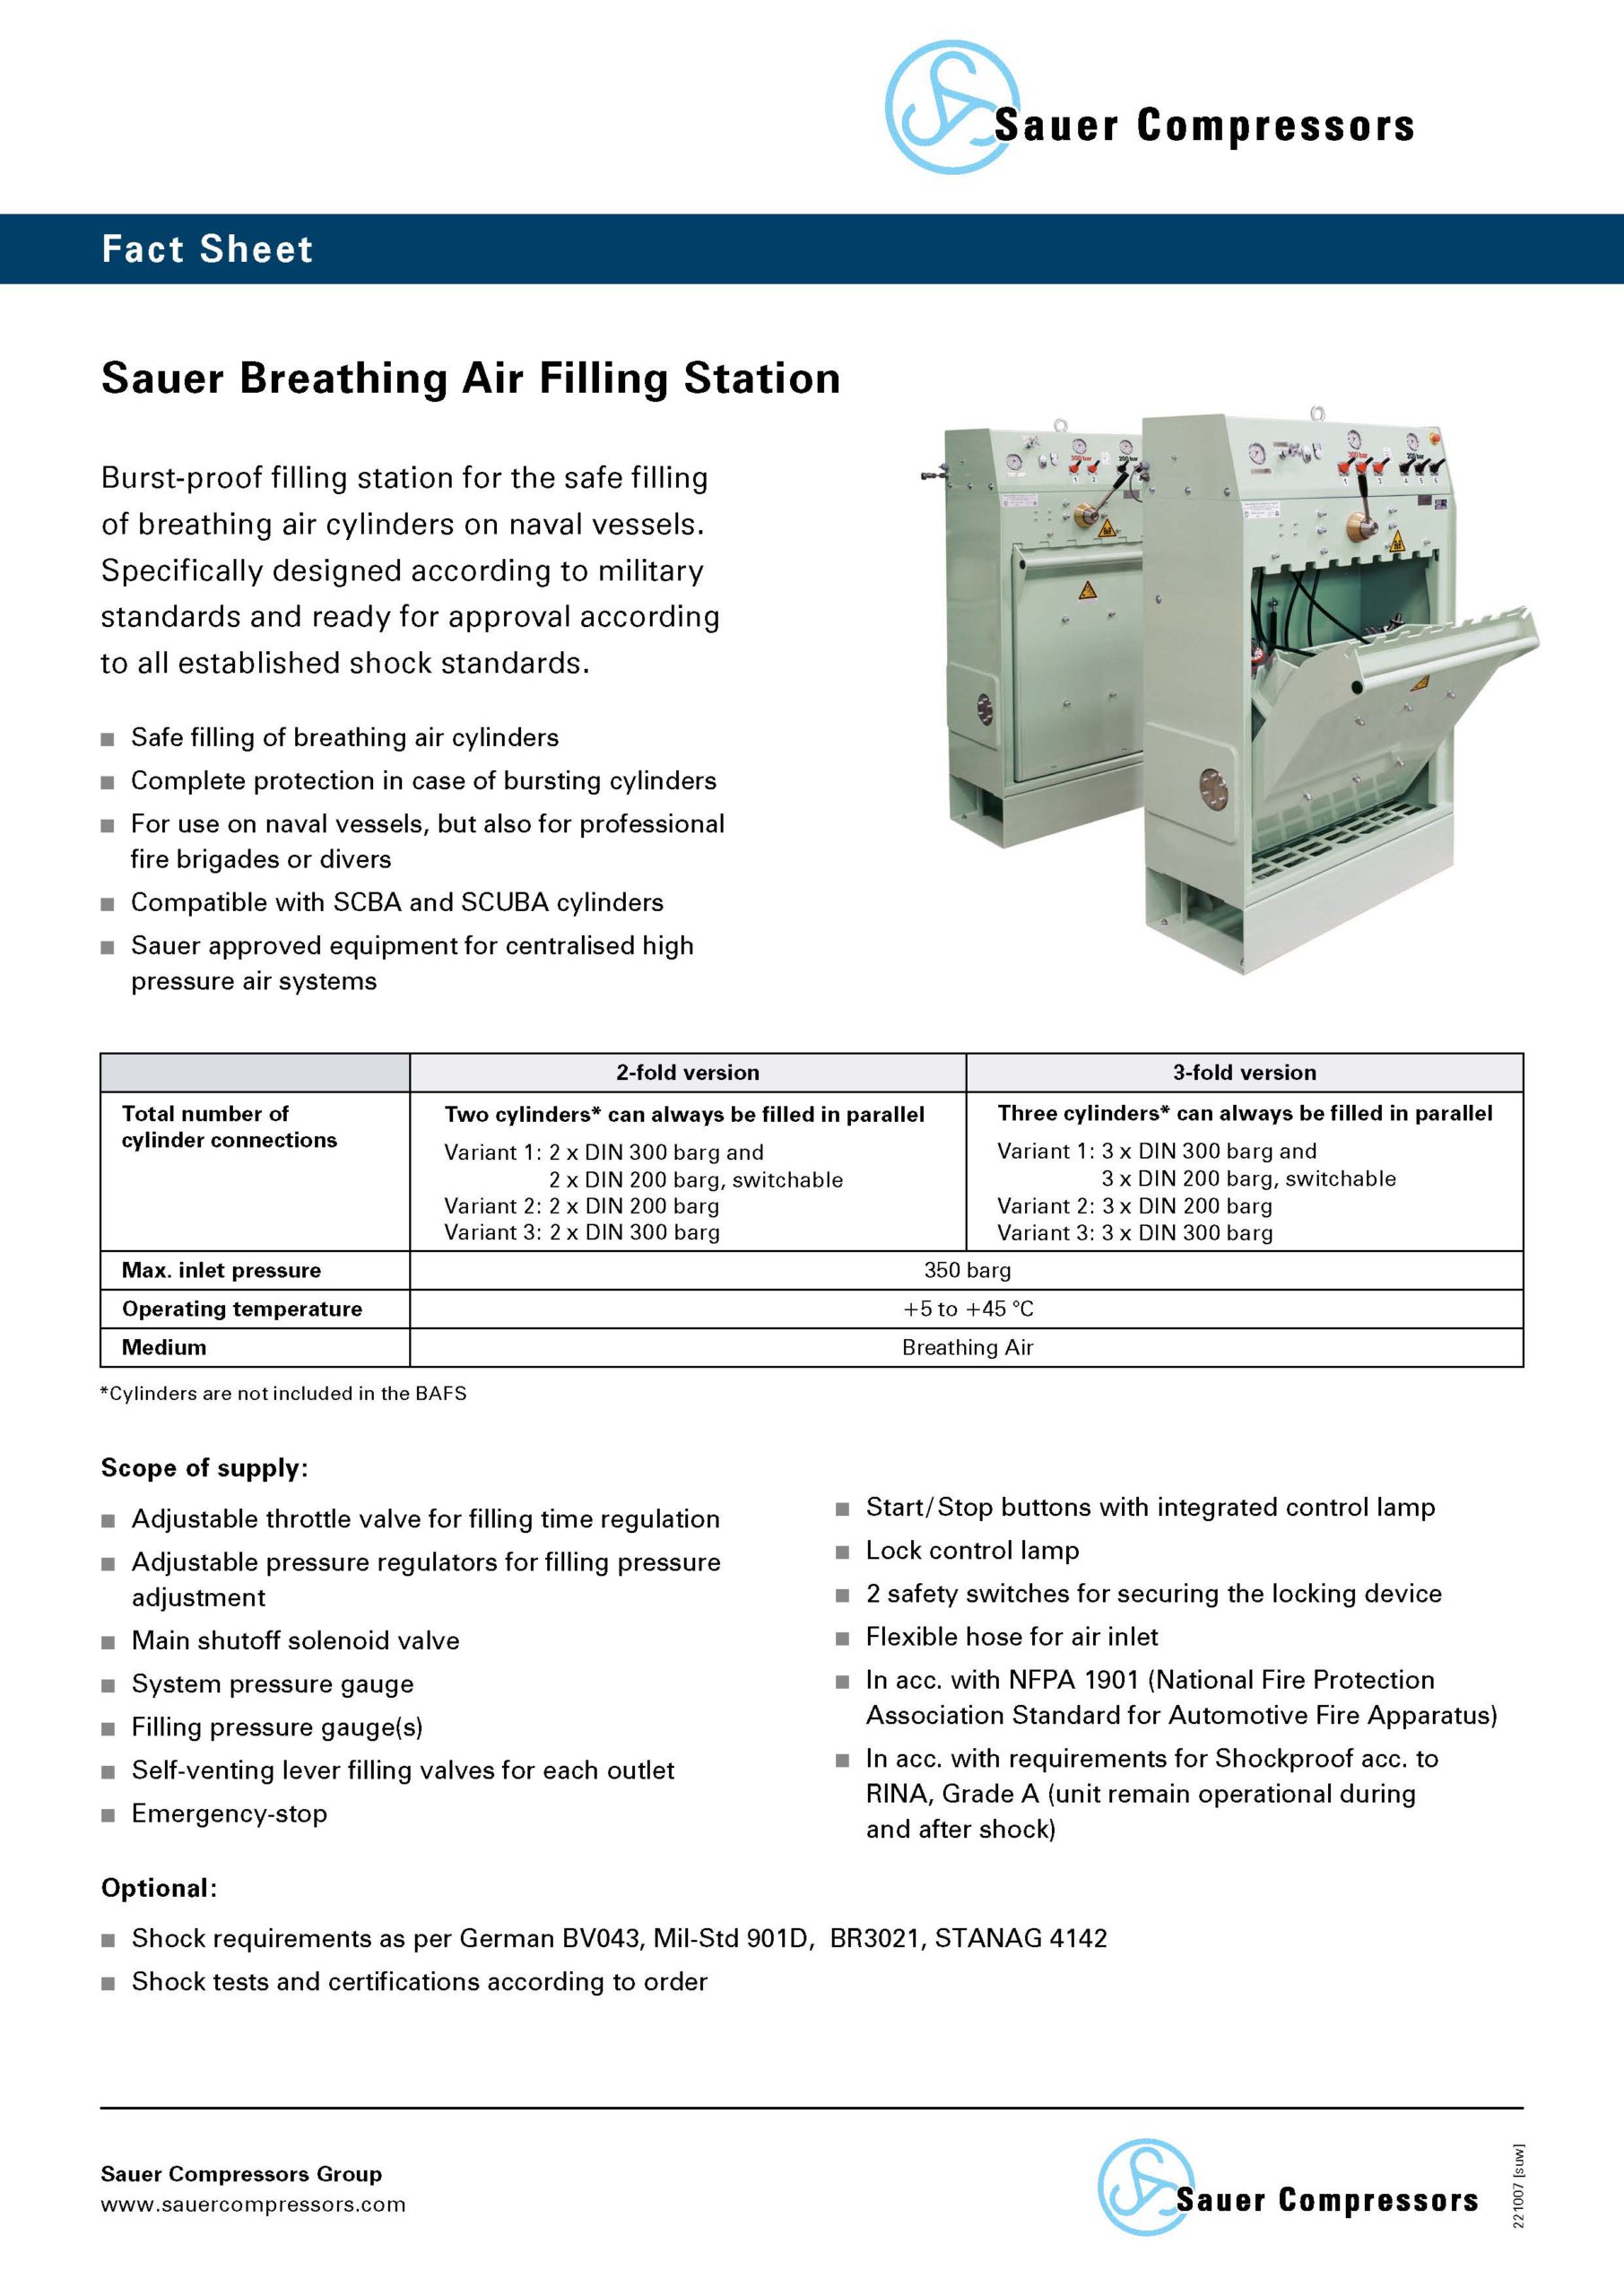 Sauer Breathing Air Filling Station